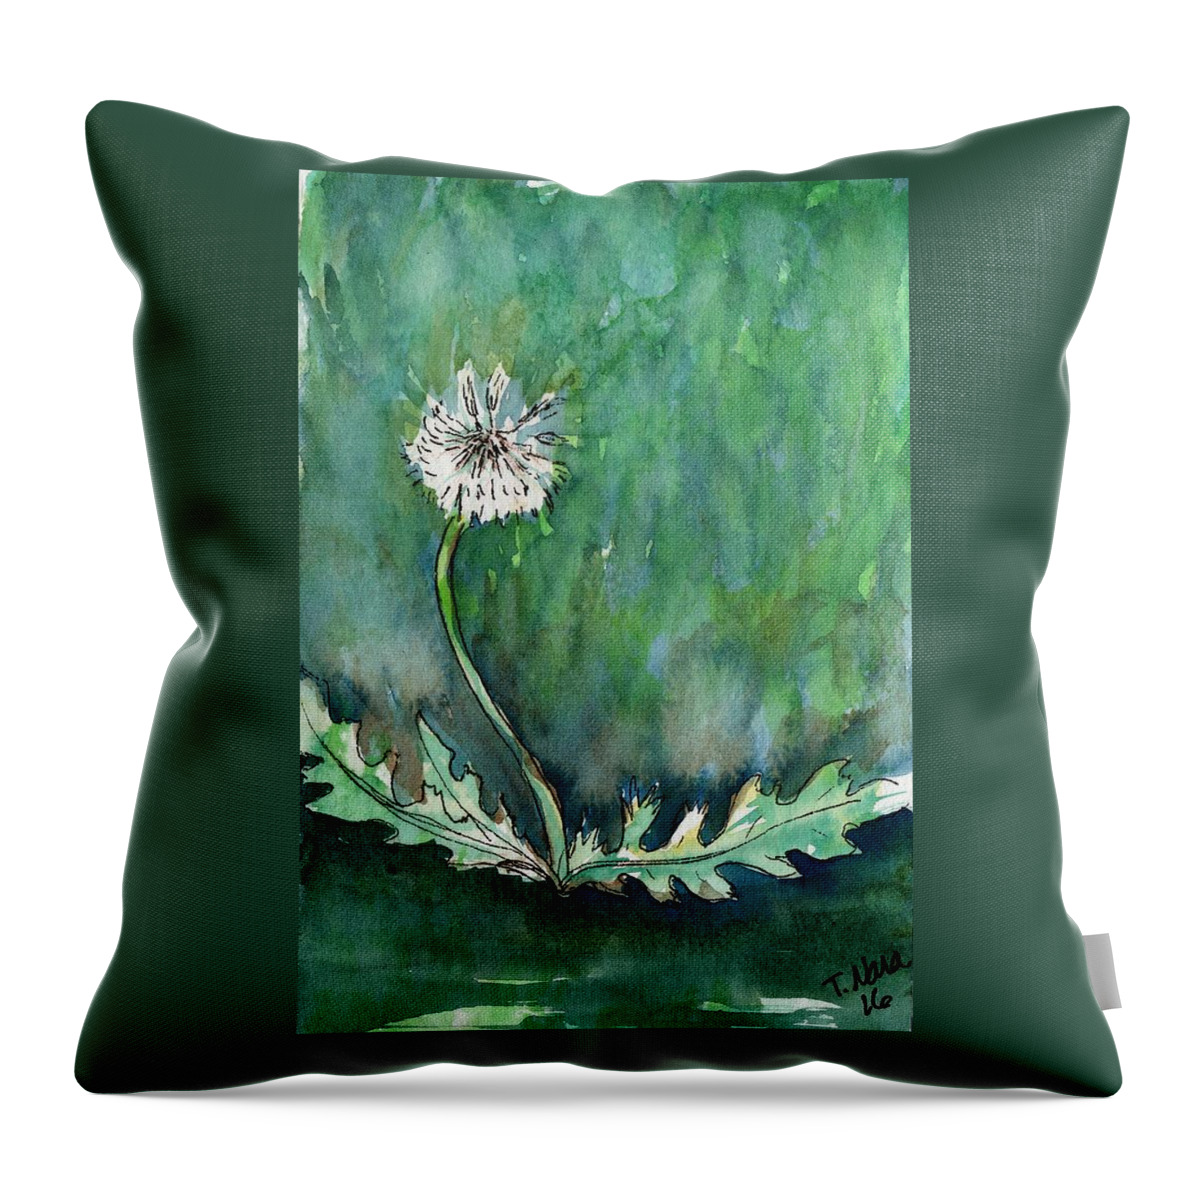 Dandilion Throw Pillow featuring the painting Dandilion after a Long Dry Spell by Tammy Nara